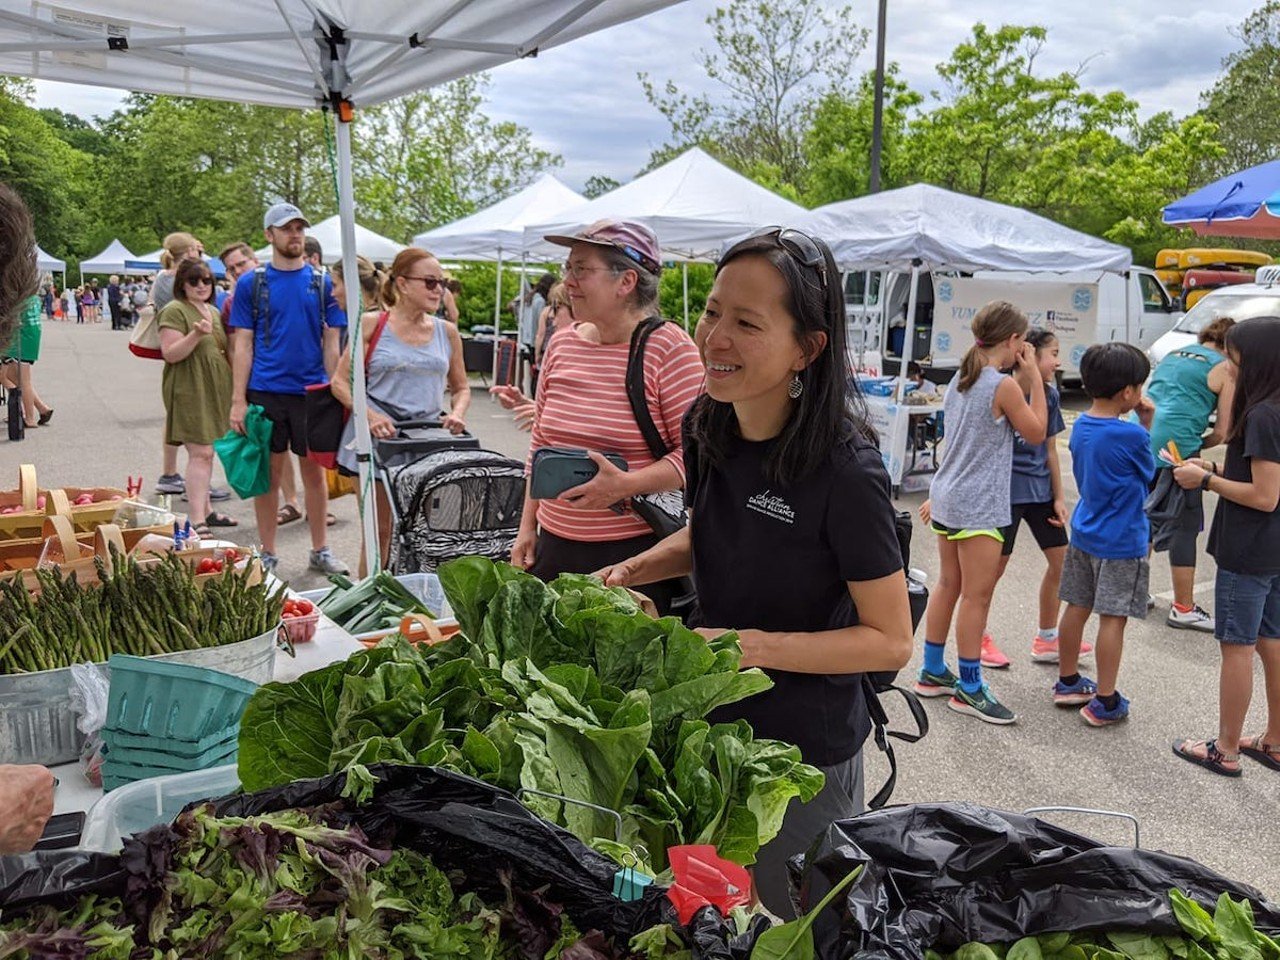 Loveland Farmers Market
205 Broadway St., Loveland
Tuesdays 3-6:30 p.m.
The Loveland Farmers Market runs through October. All items are grown and/or produced within 100 miles of Loveland and SNAP/EBT is accepted. The market even features weekly entertainment and activities for kids.